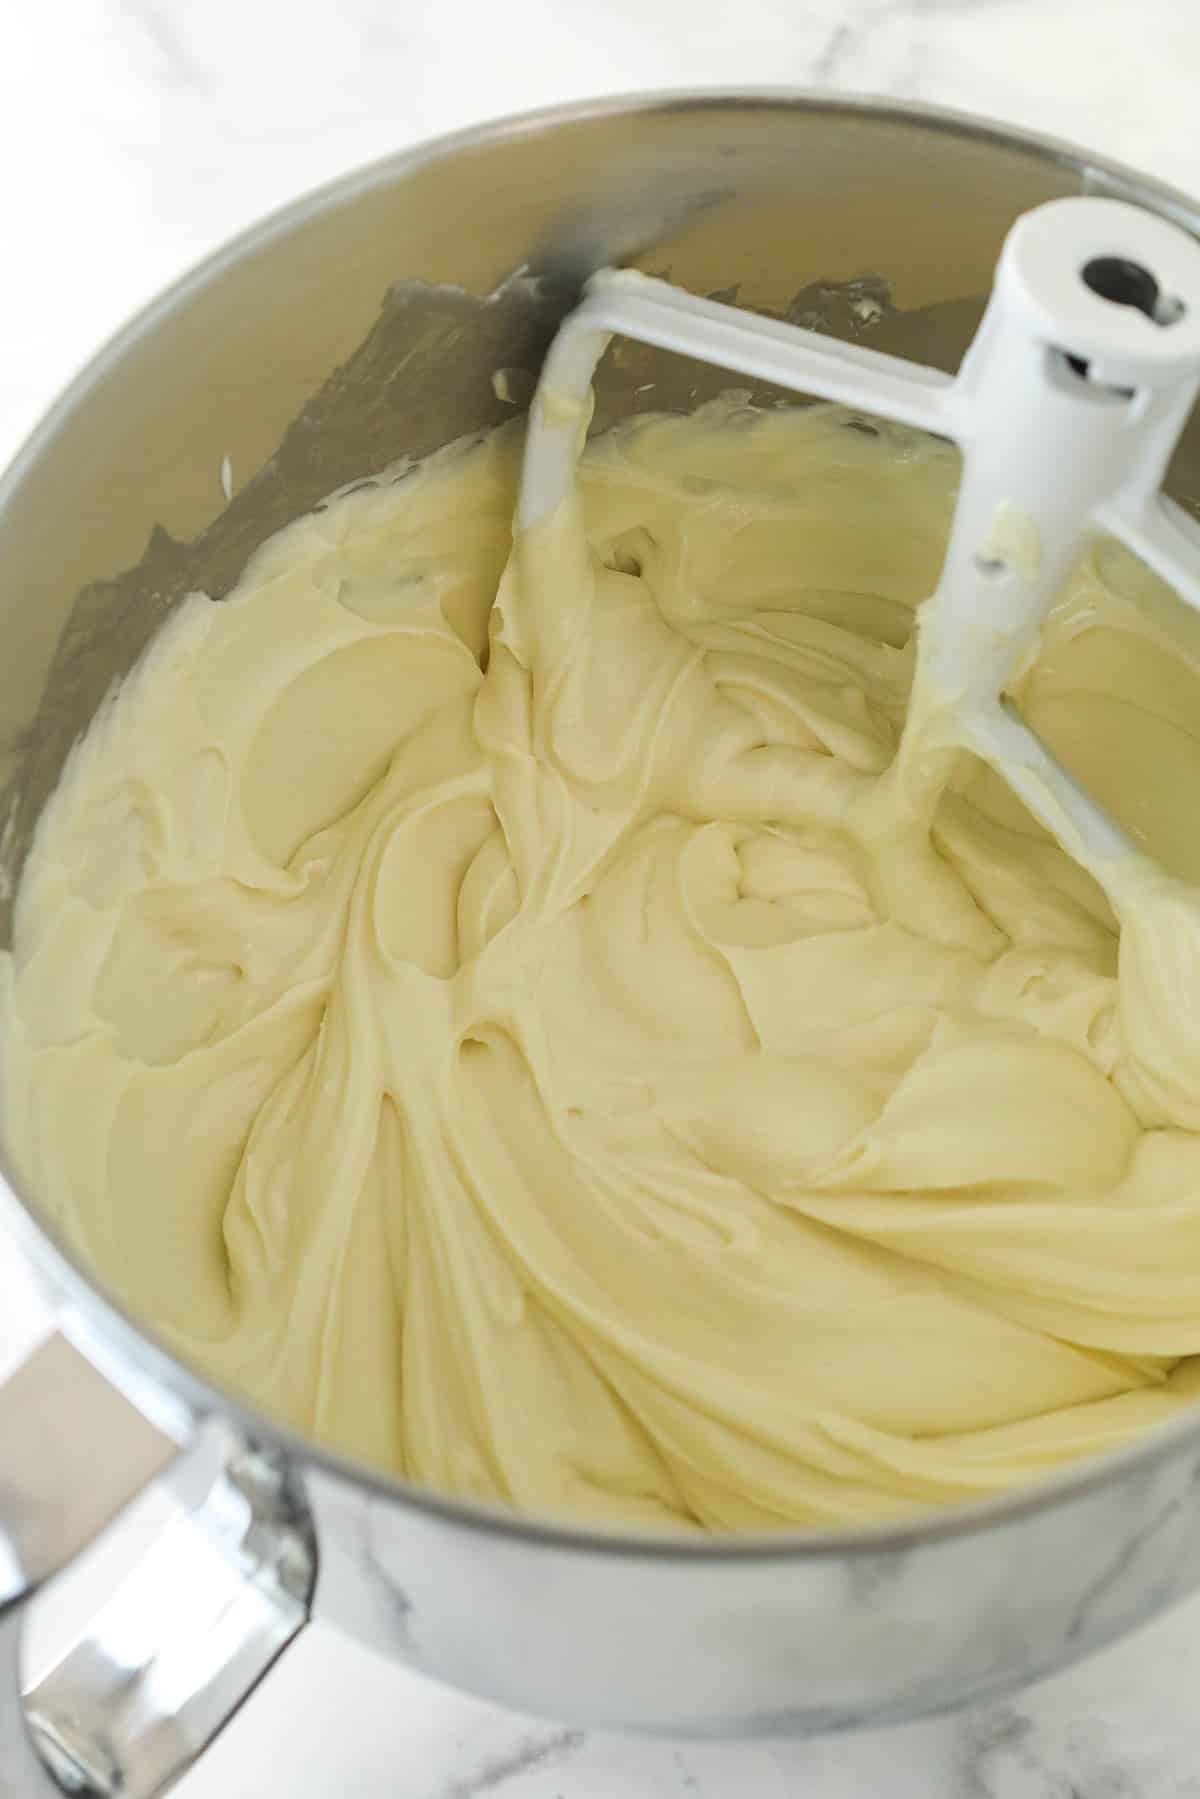 Mixing sour cream and vanilla into a cream cheese mixture for cheesecake filling.